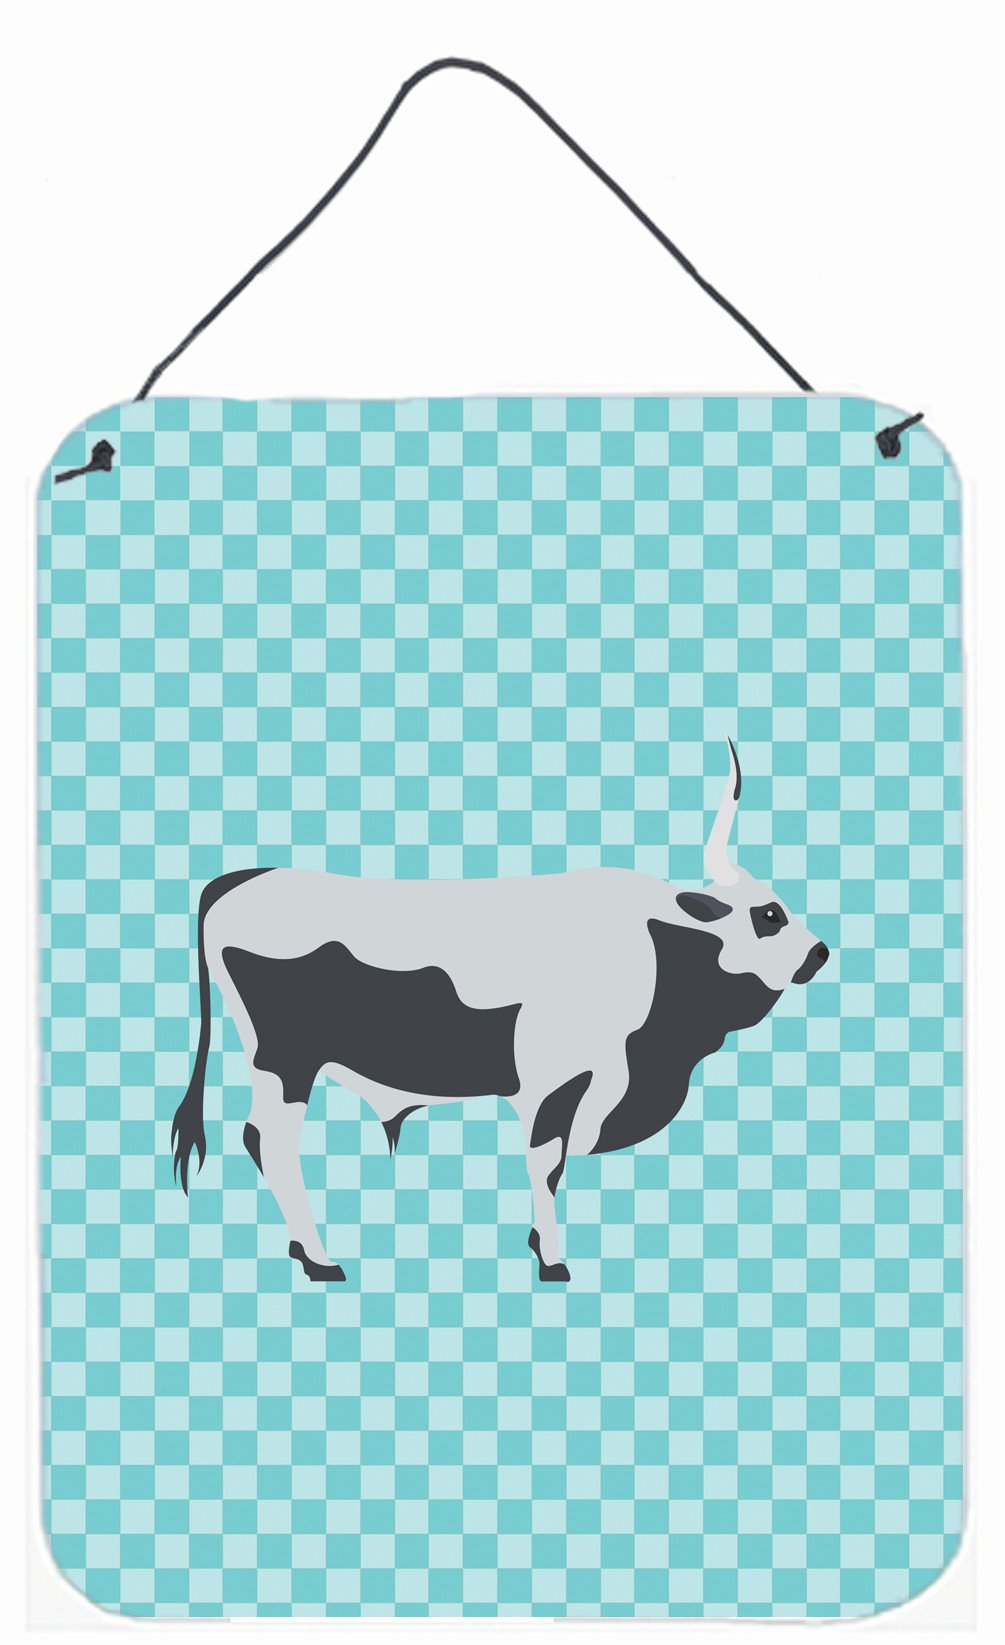 Hungarian Grey Steppe Cow Blue Check Wall or Door Hanging Prints BB7998DS1216 by Caroline's Treasures